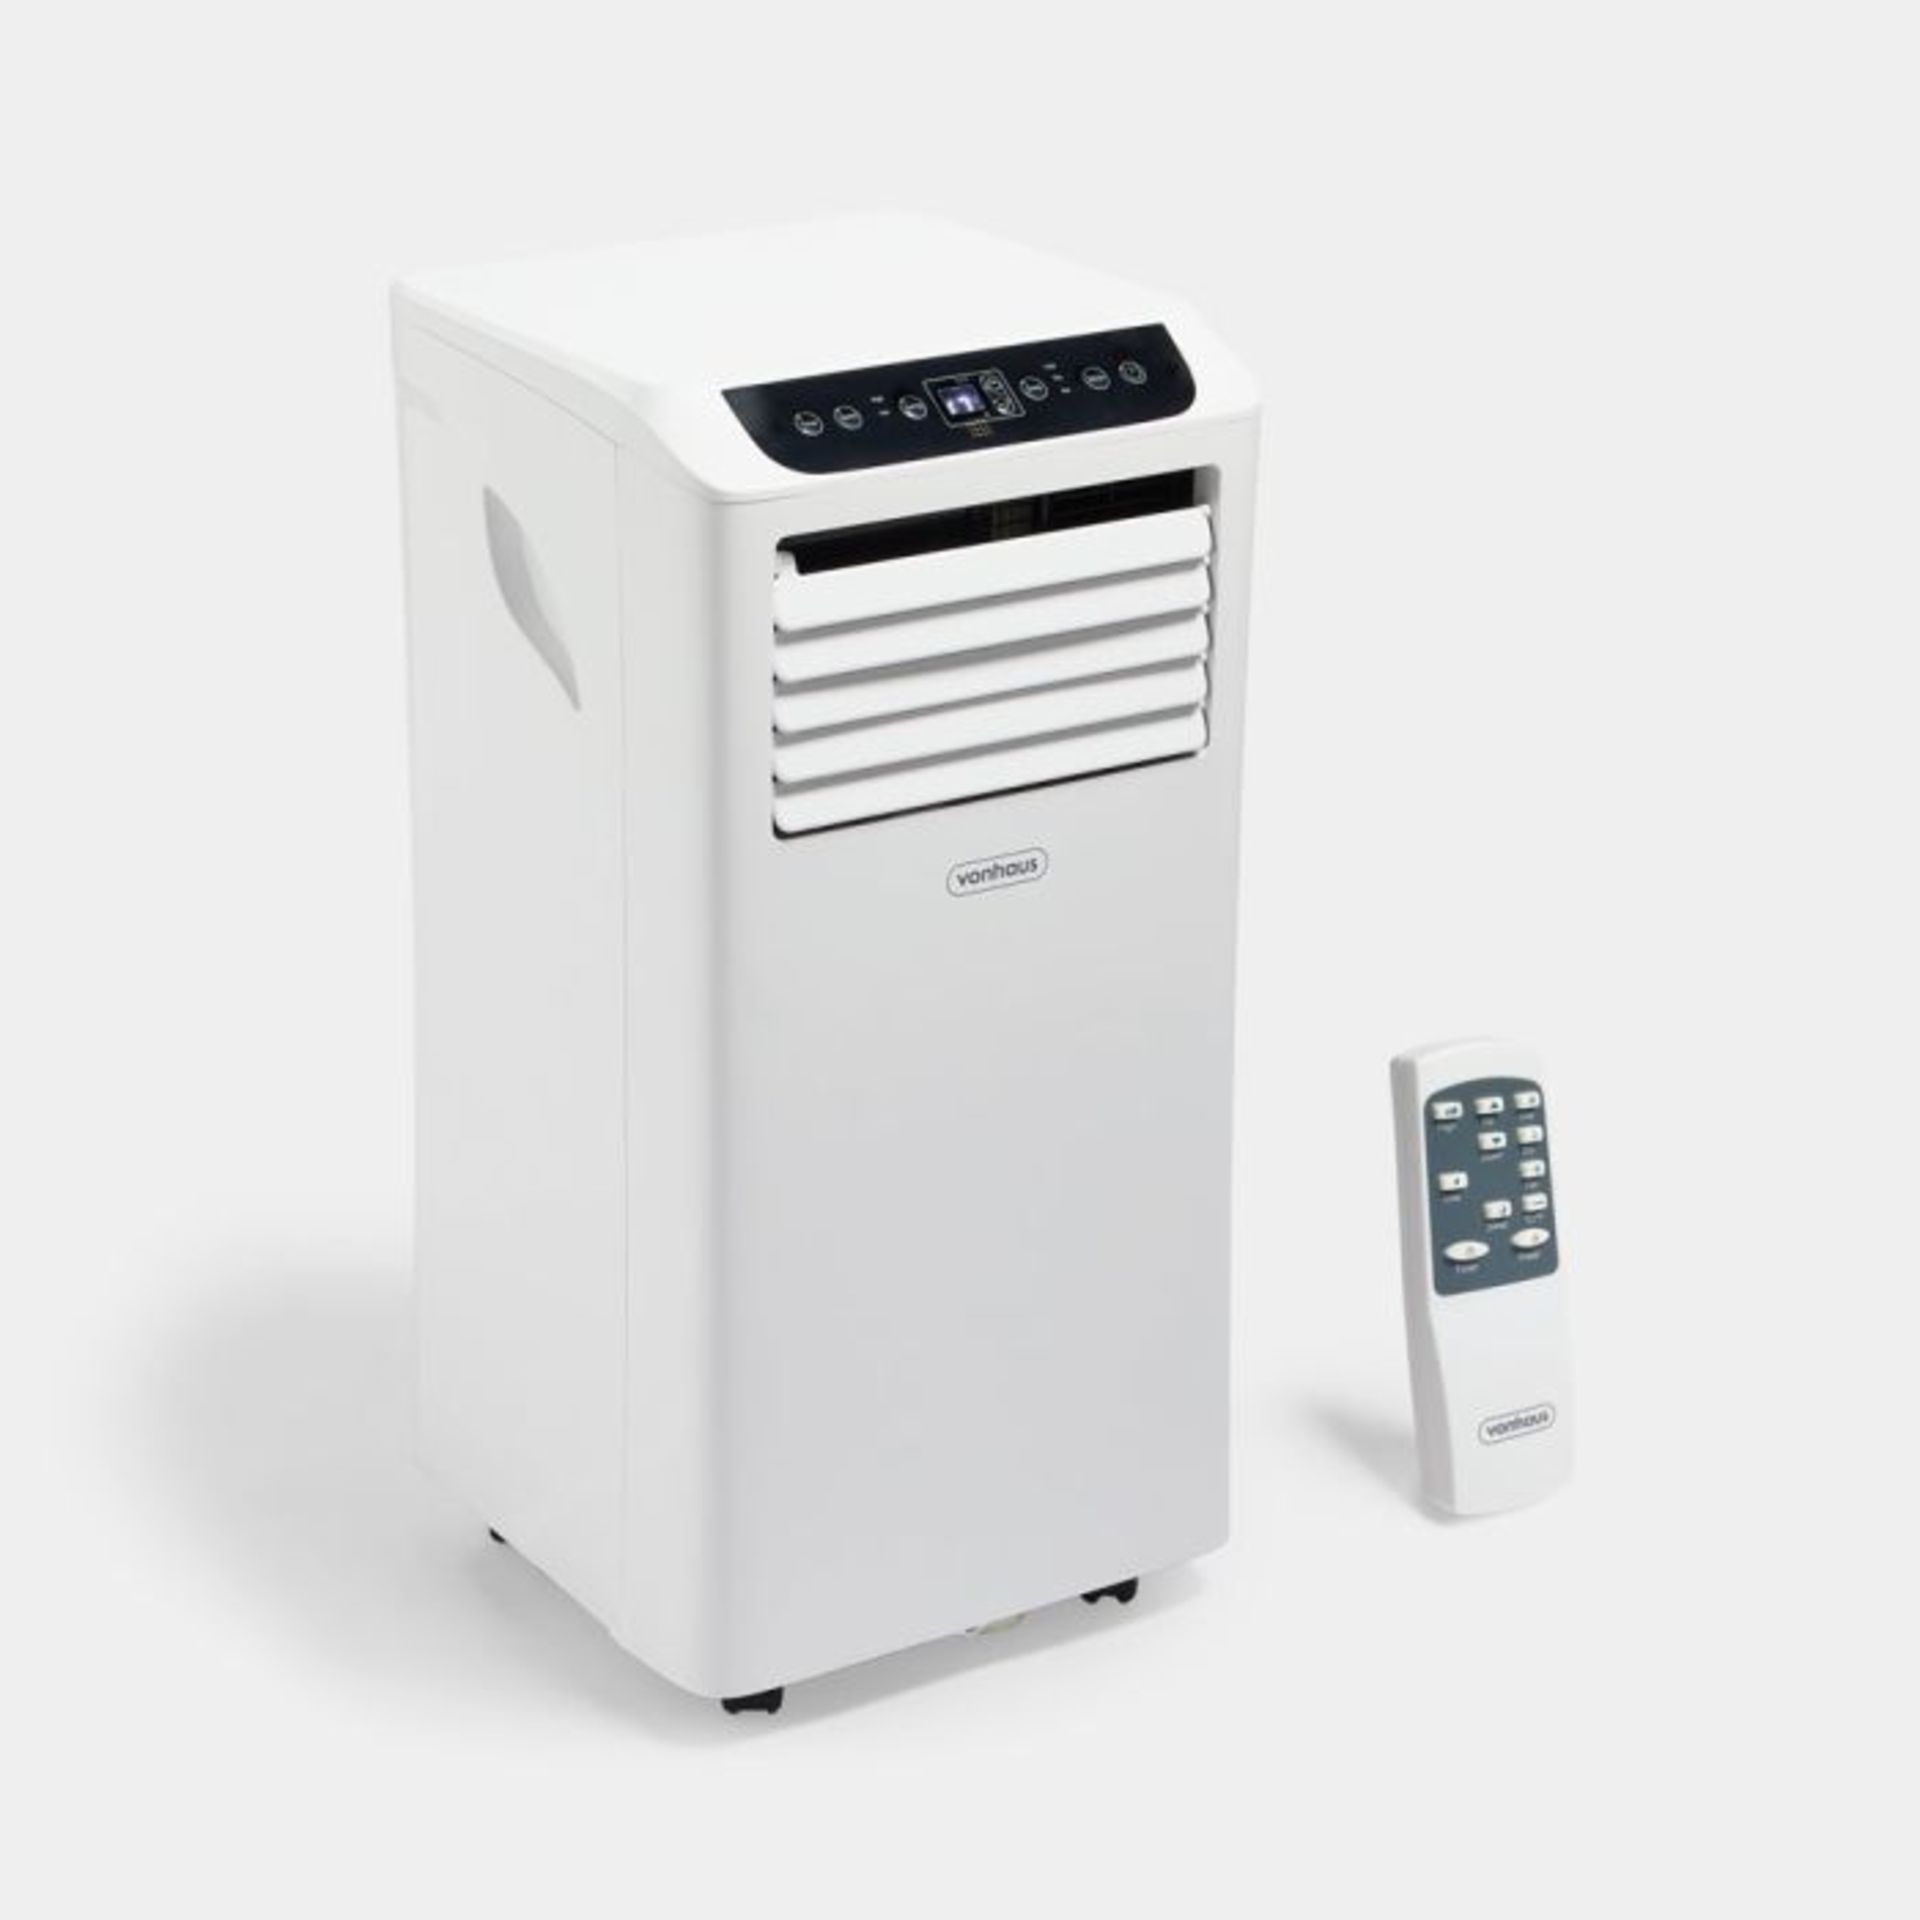 NEW & BOXED 9000 BTU Portable Air Conditioner. RRP £299. (489). With 9000BTU power and oscillation